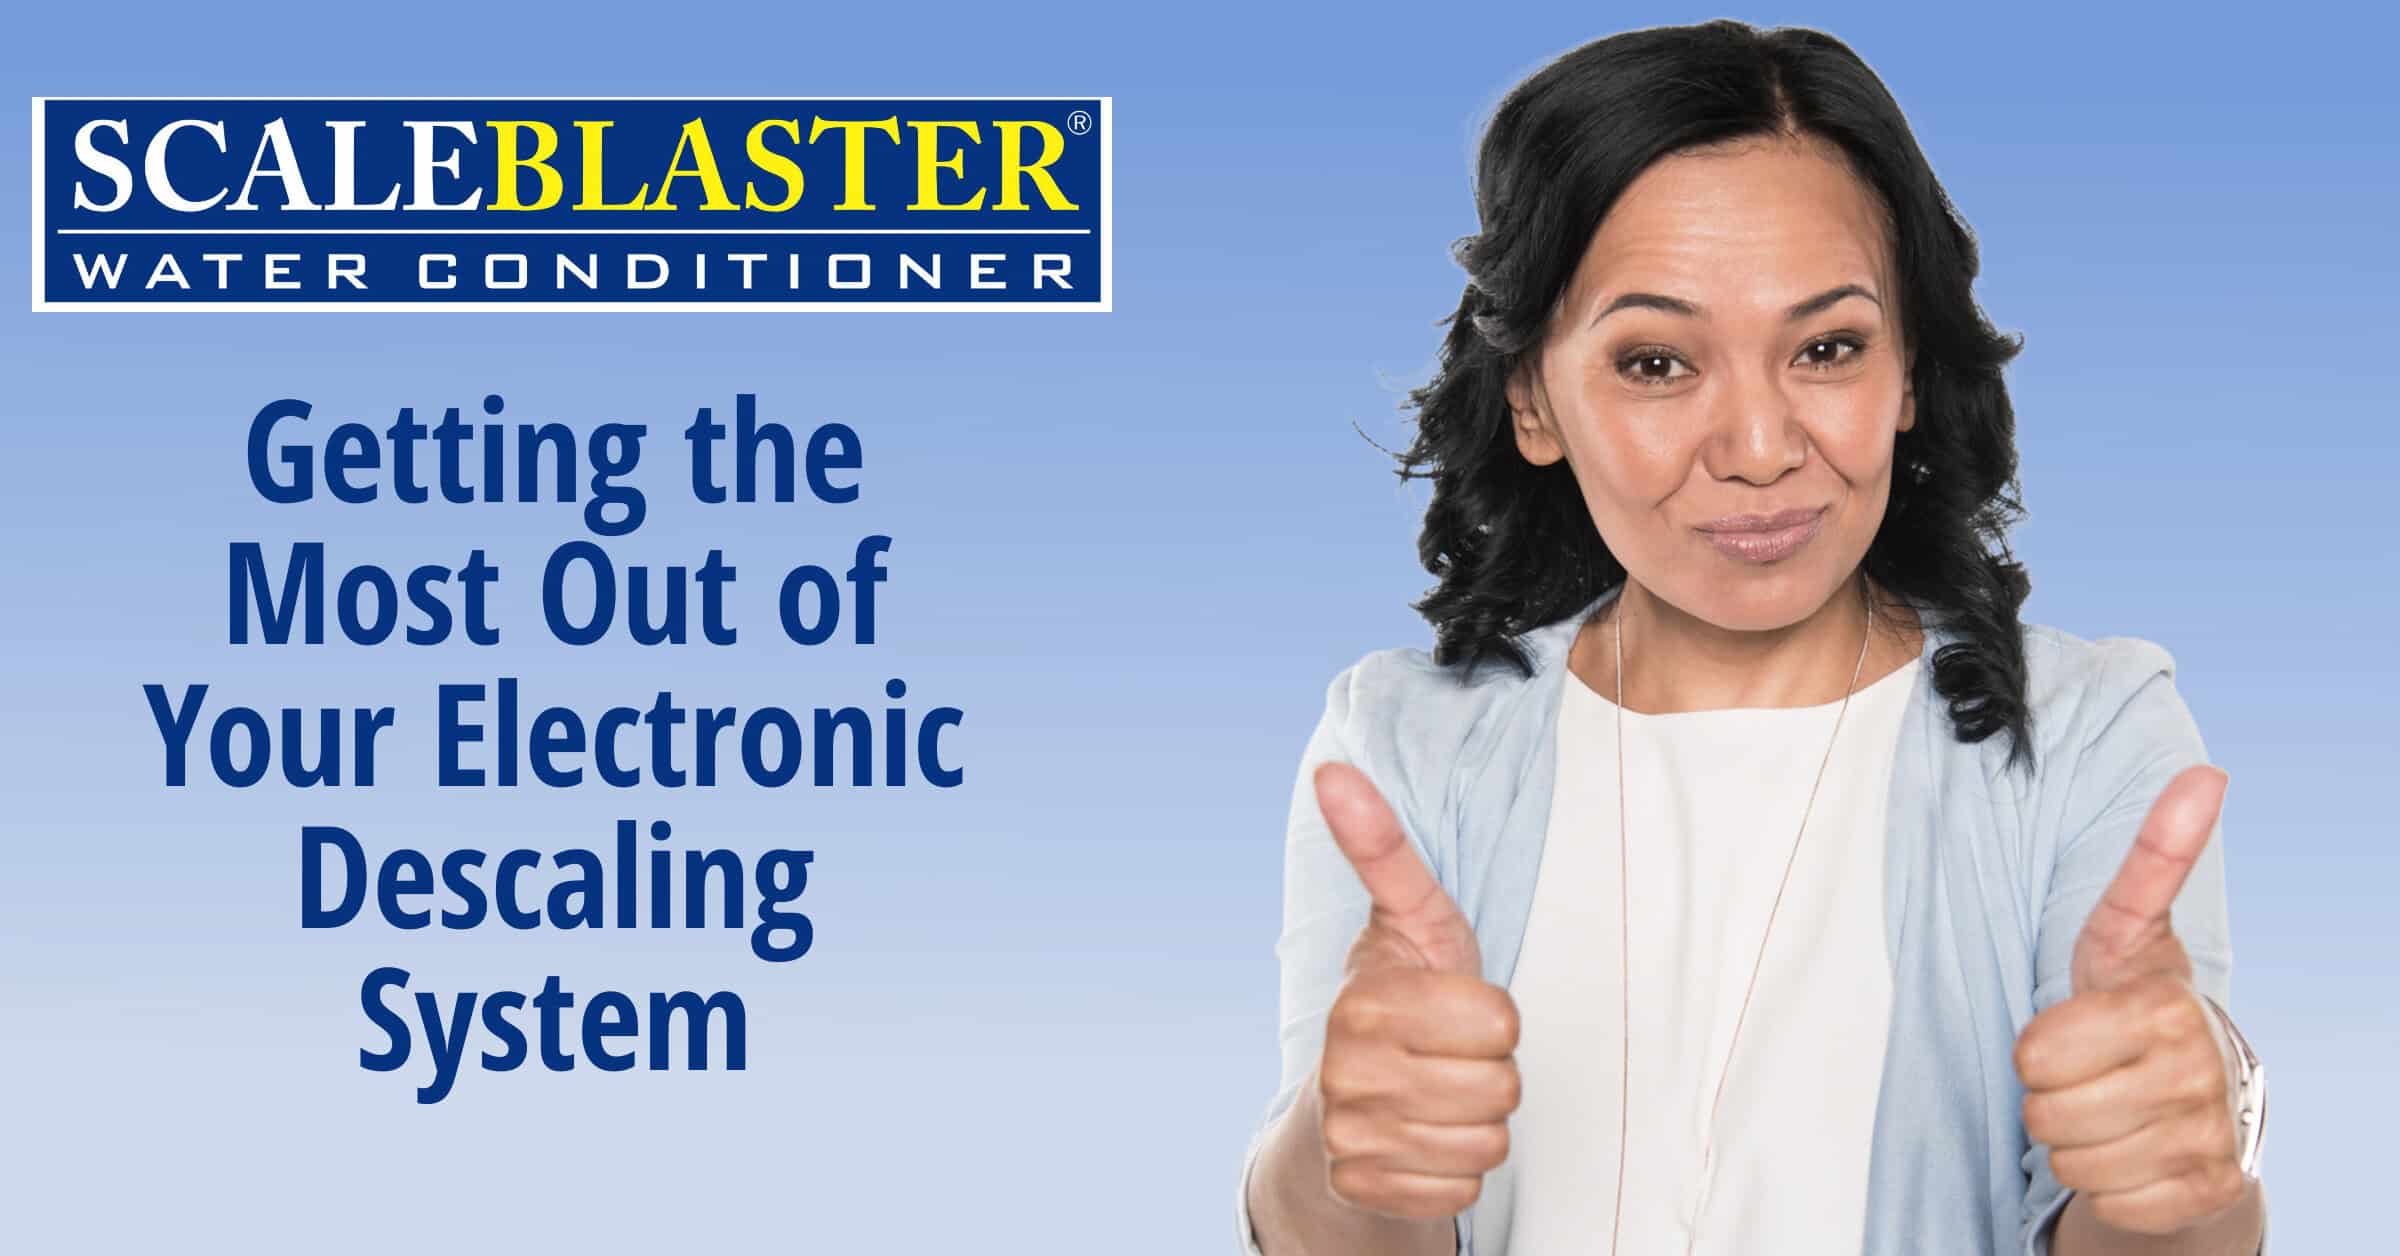 Getting the Most Out of Your Electronic Descaling System